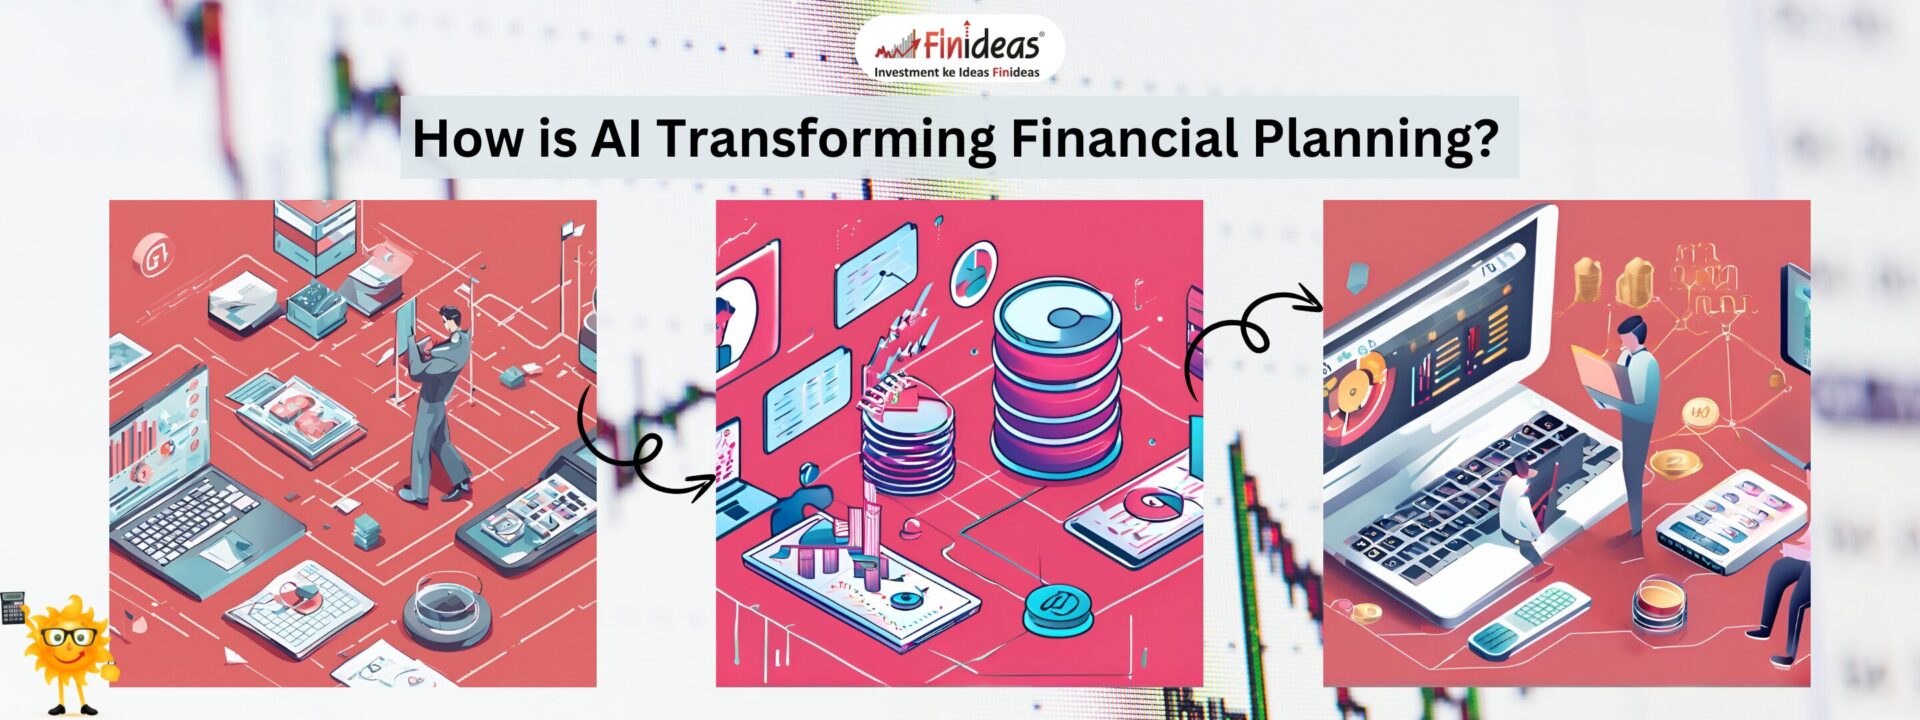 How is AI Transforming Financial Planning